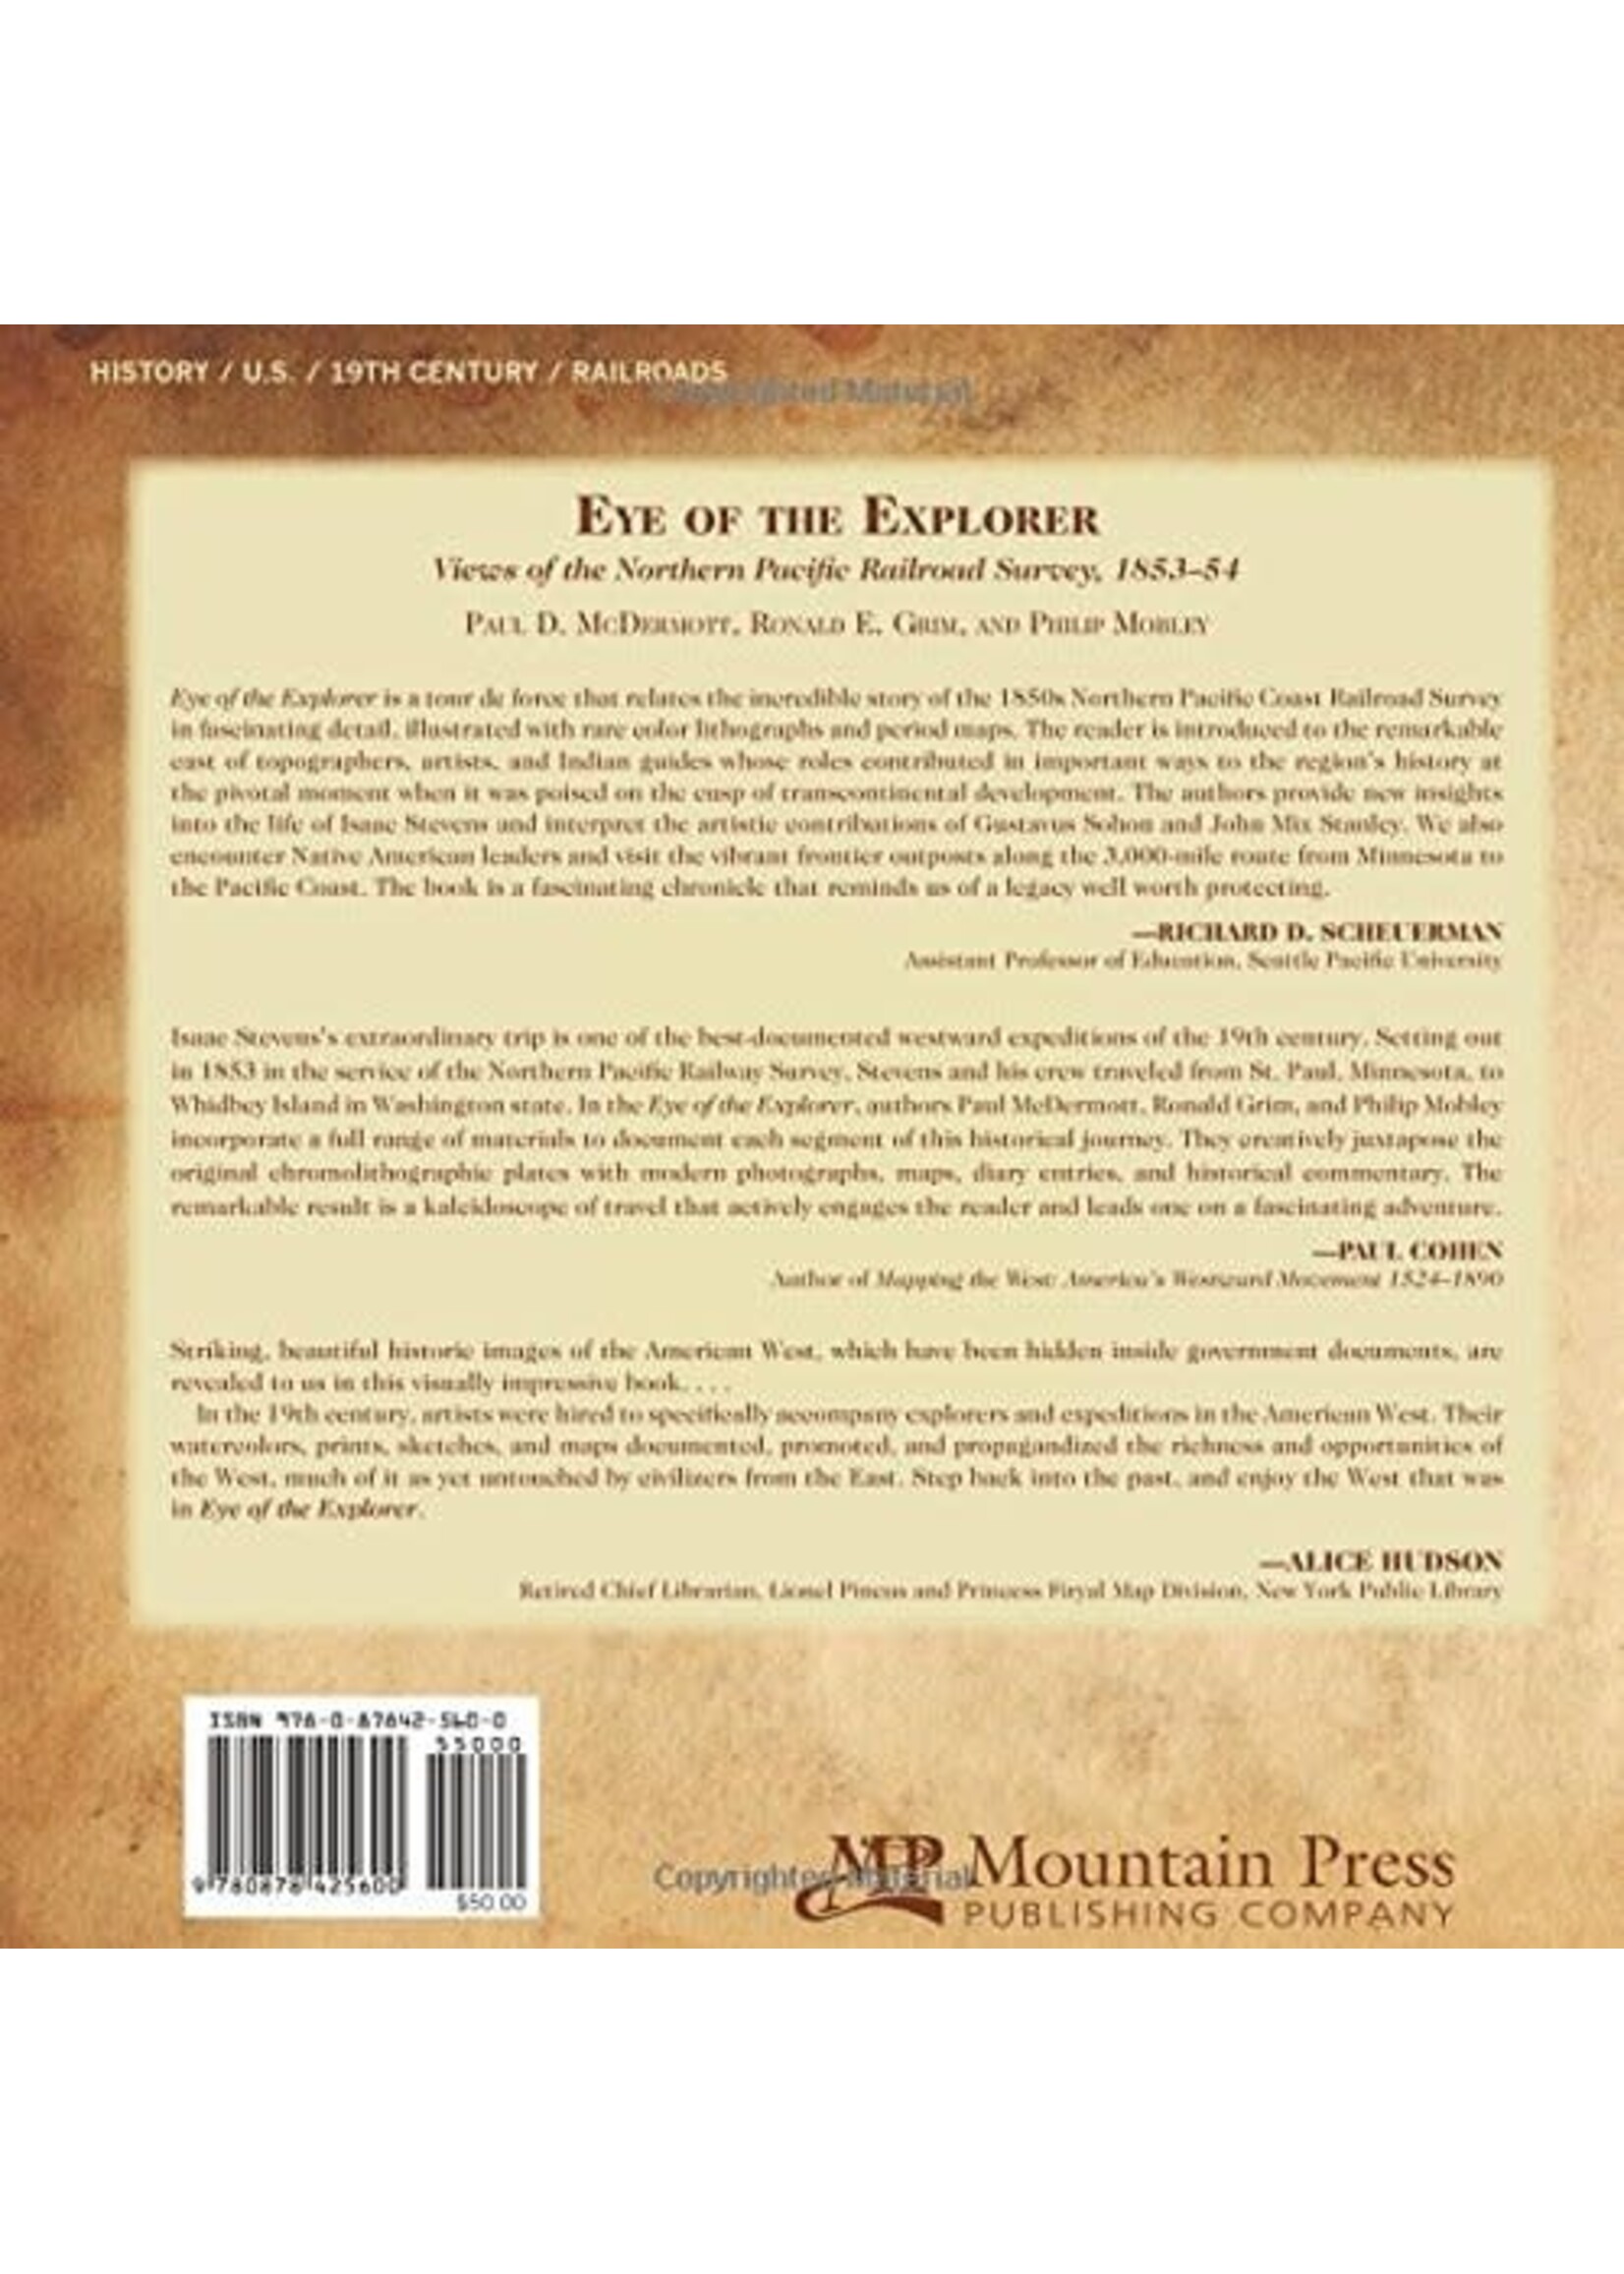 Eye of the Explorer: Views of the Northern Pacific Railroad Survey 1853-54